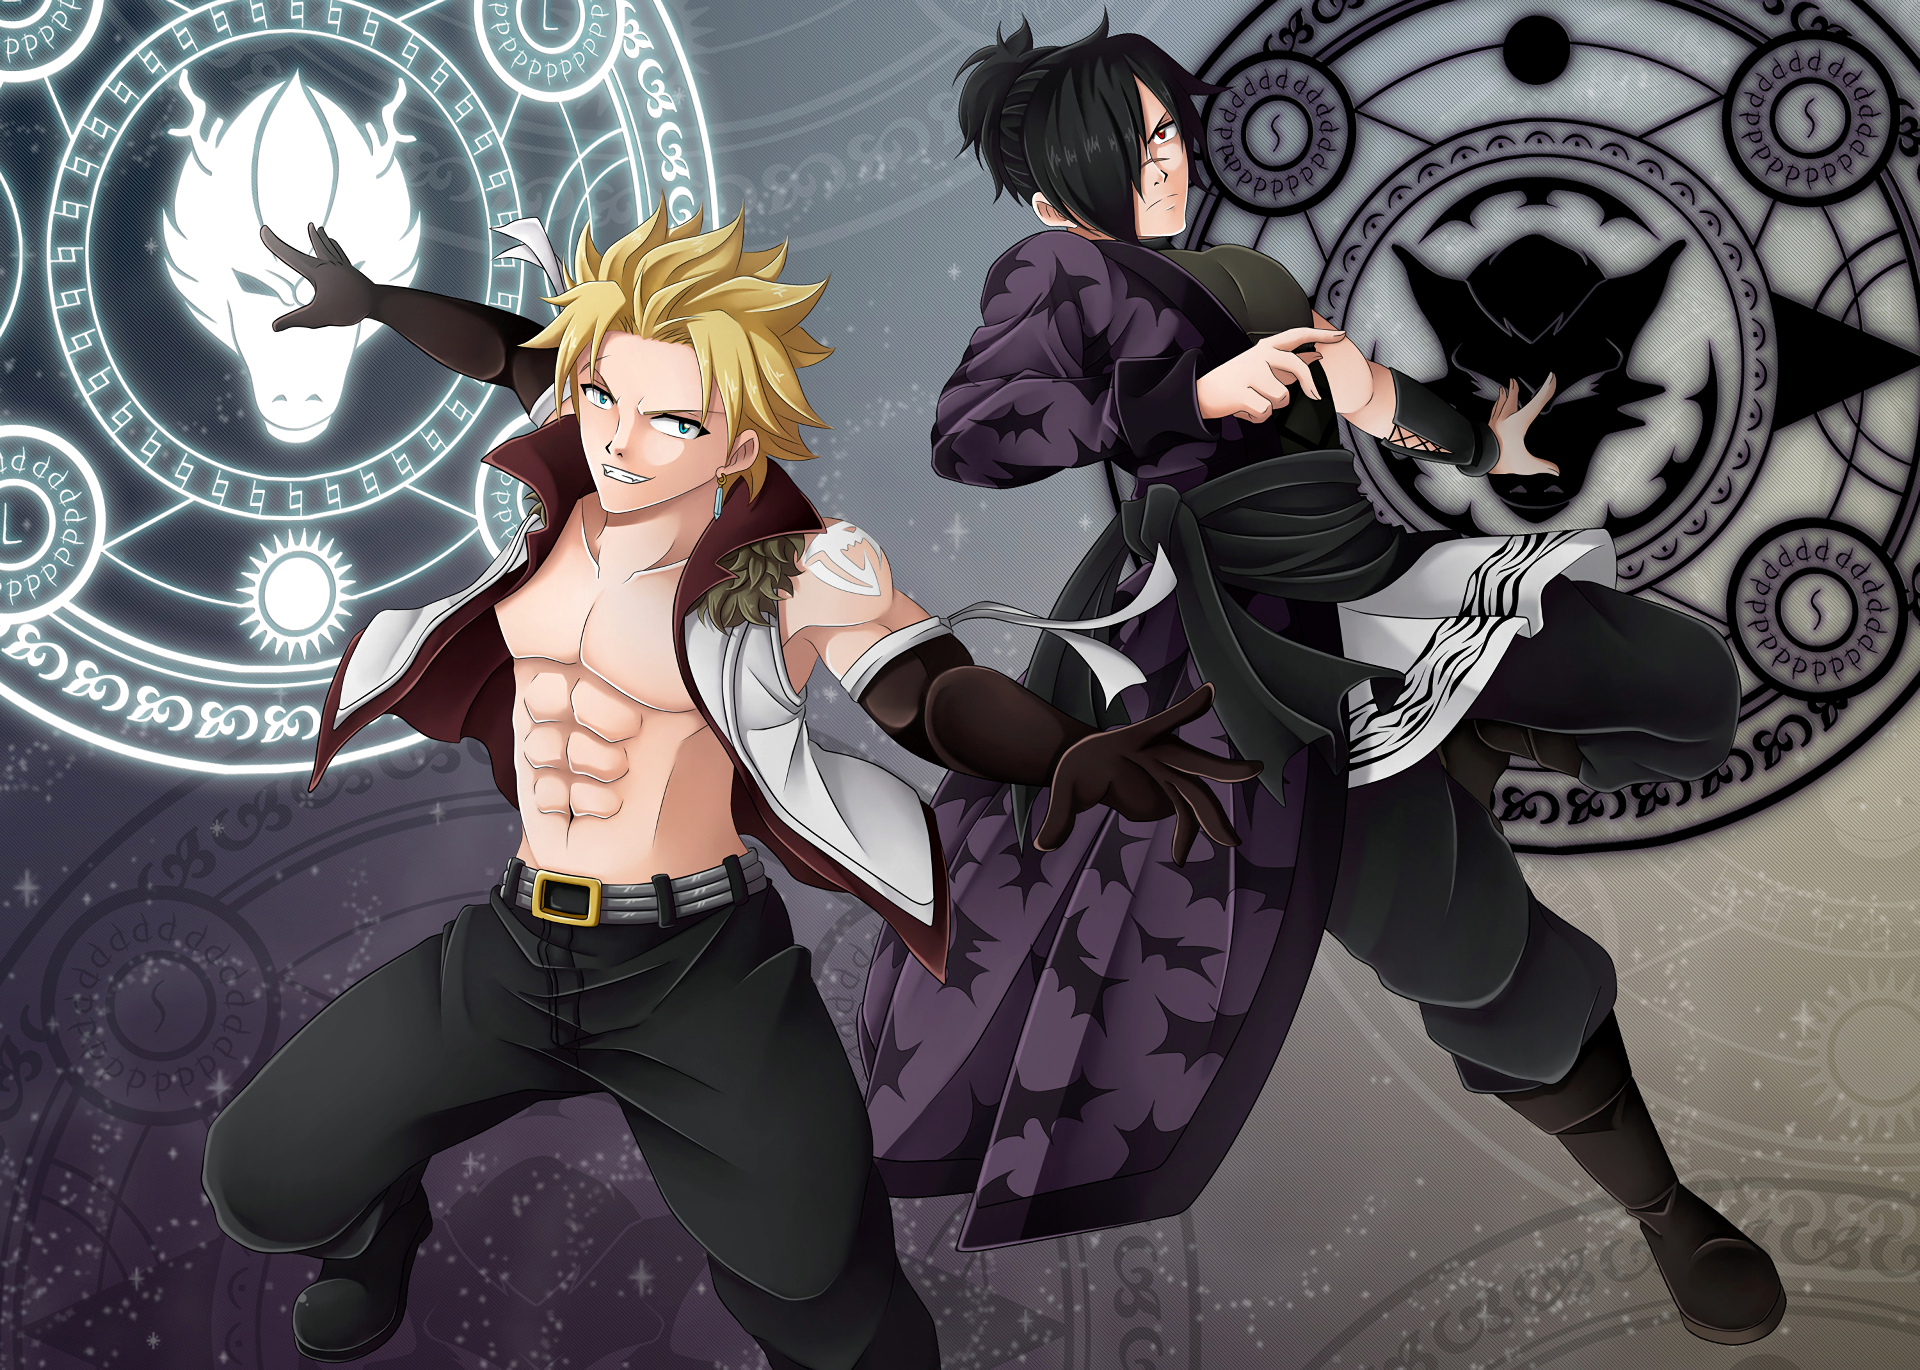 Sting Eucliffe and Rogue Cheney. Sting Eucliffe And Rogue Cheney Wallpaper. Fairy tail anime, Fairy tail dragon slayer, Fairy tail sting